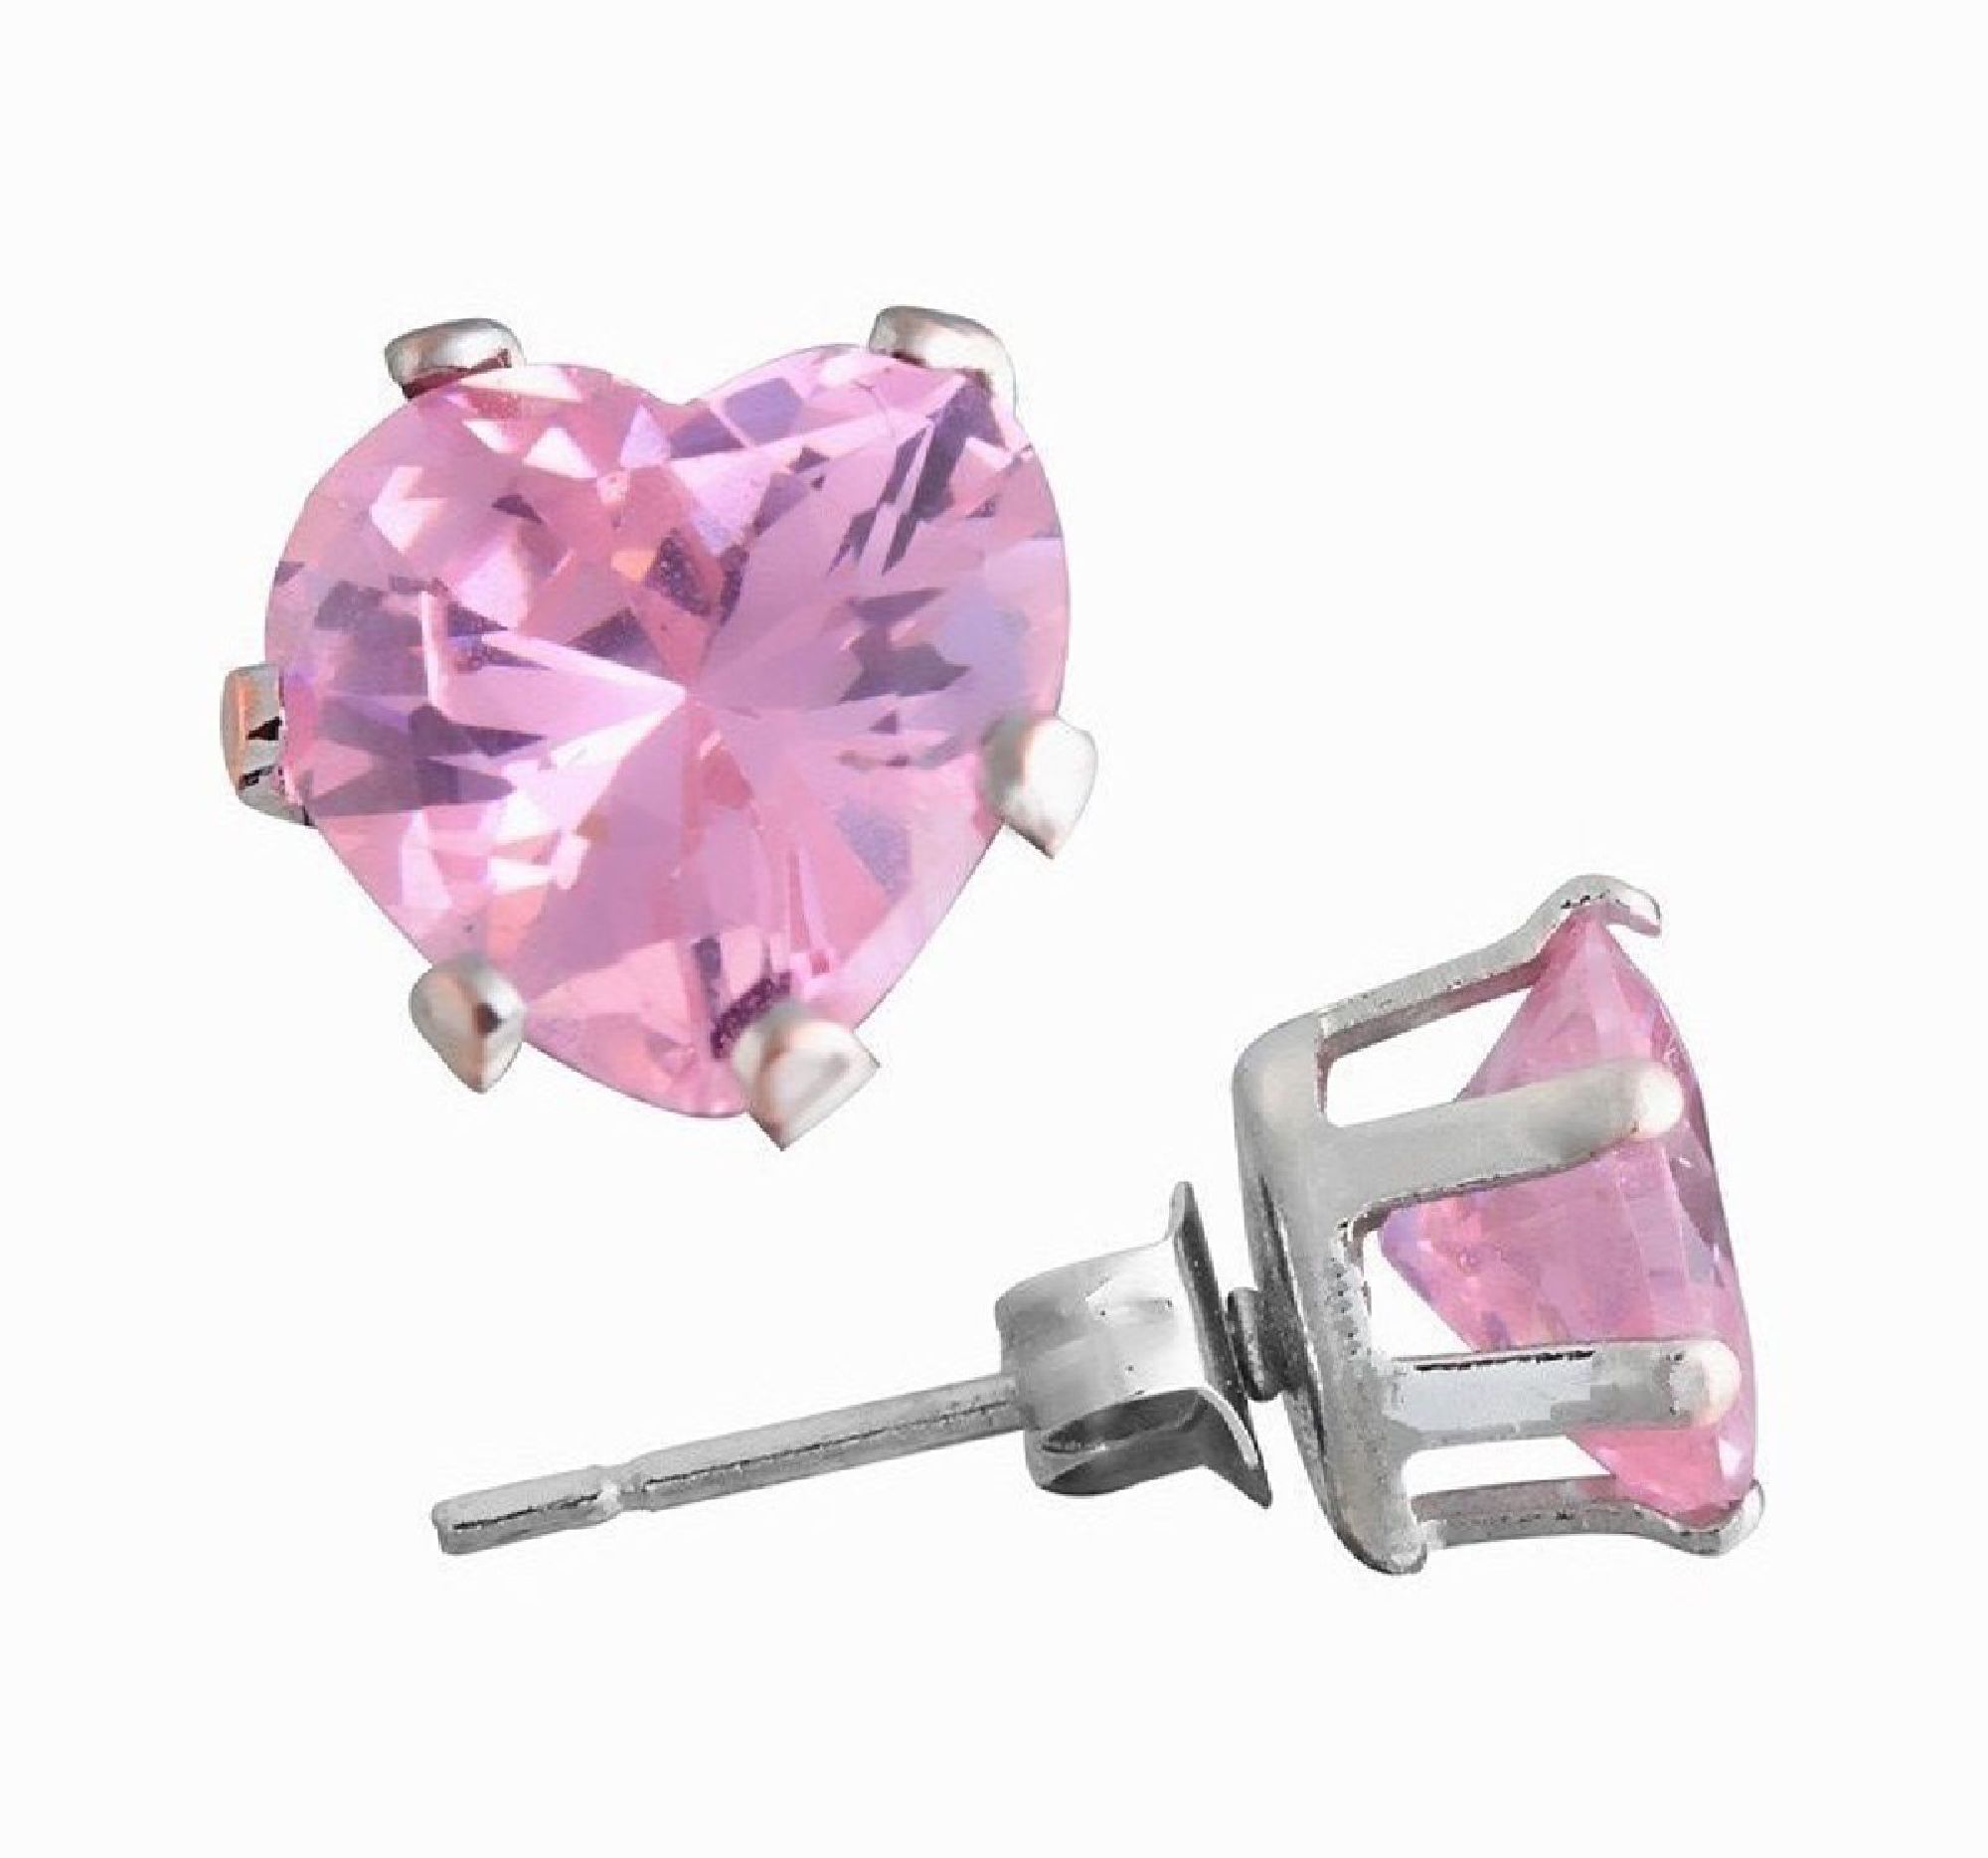 ParisJewelry.com 2 Carat Heart Shape Pink Diamond manmade Stud Earrings for Men in Platinum over Sterling Silver Designed in France